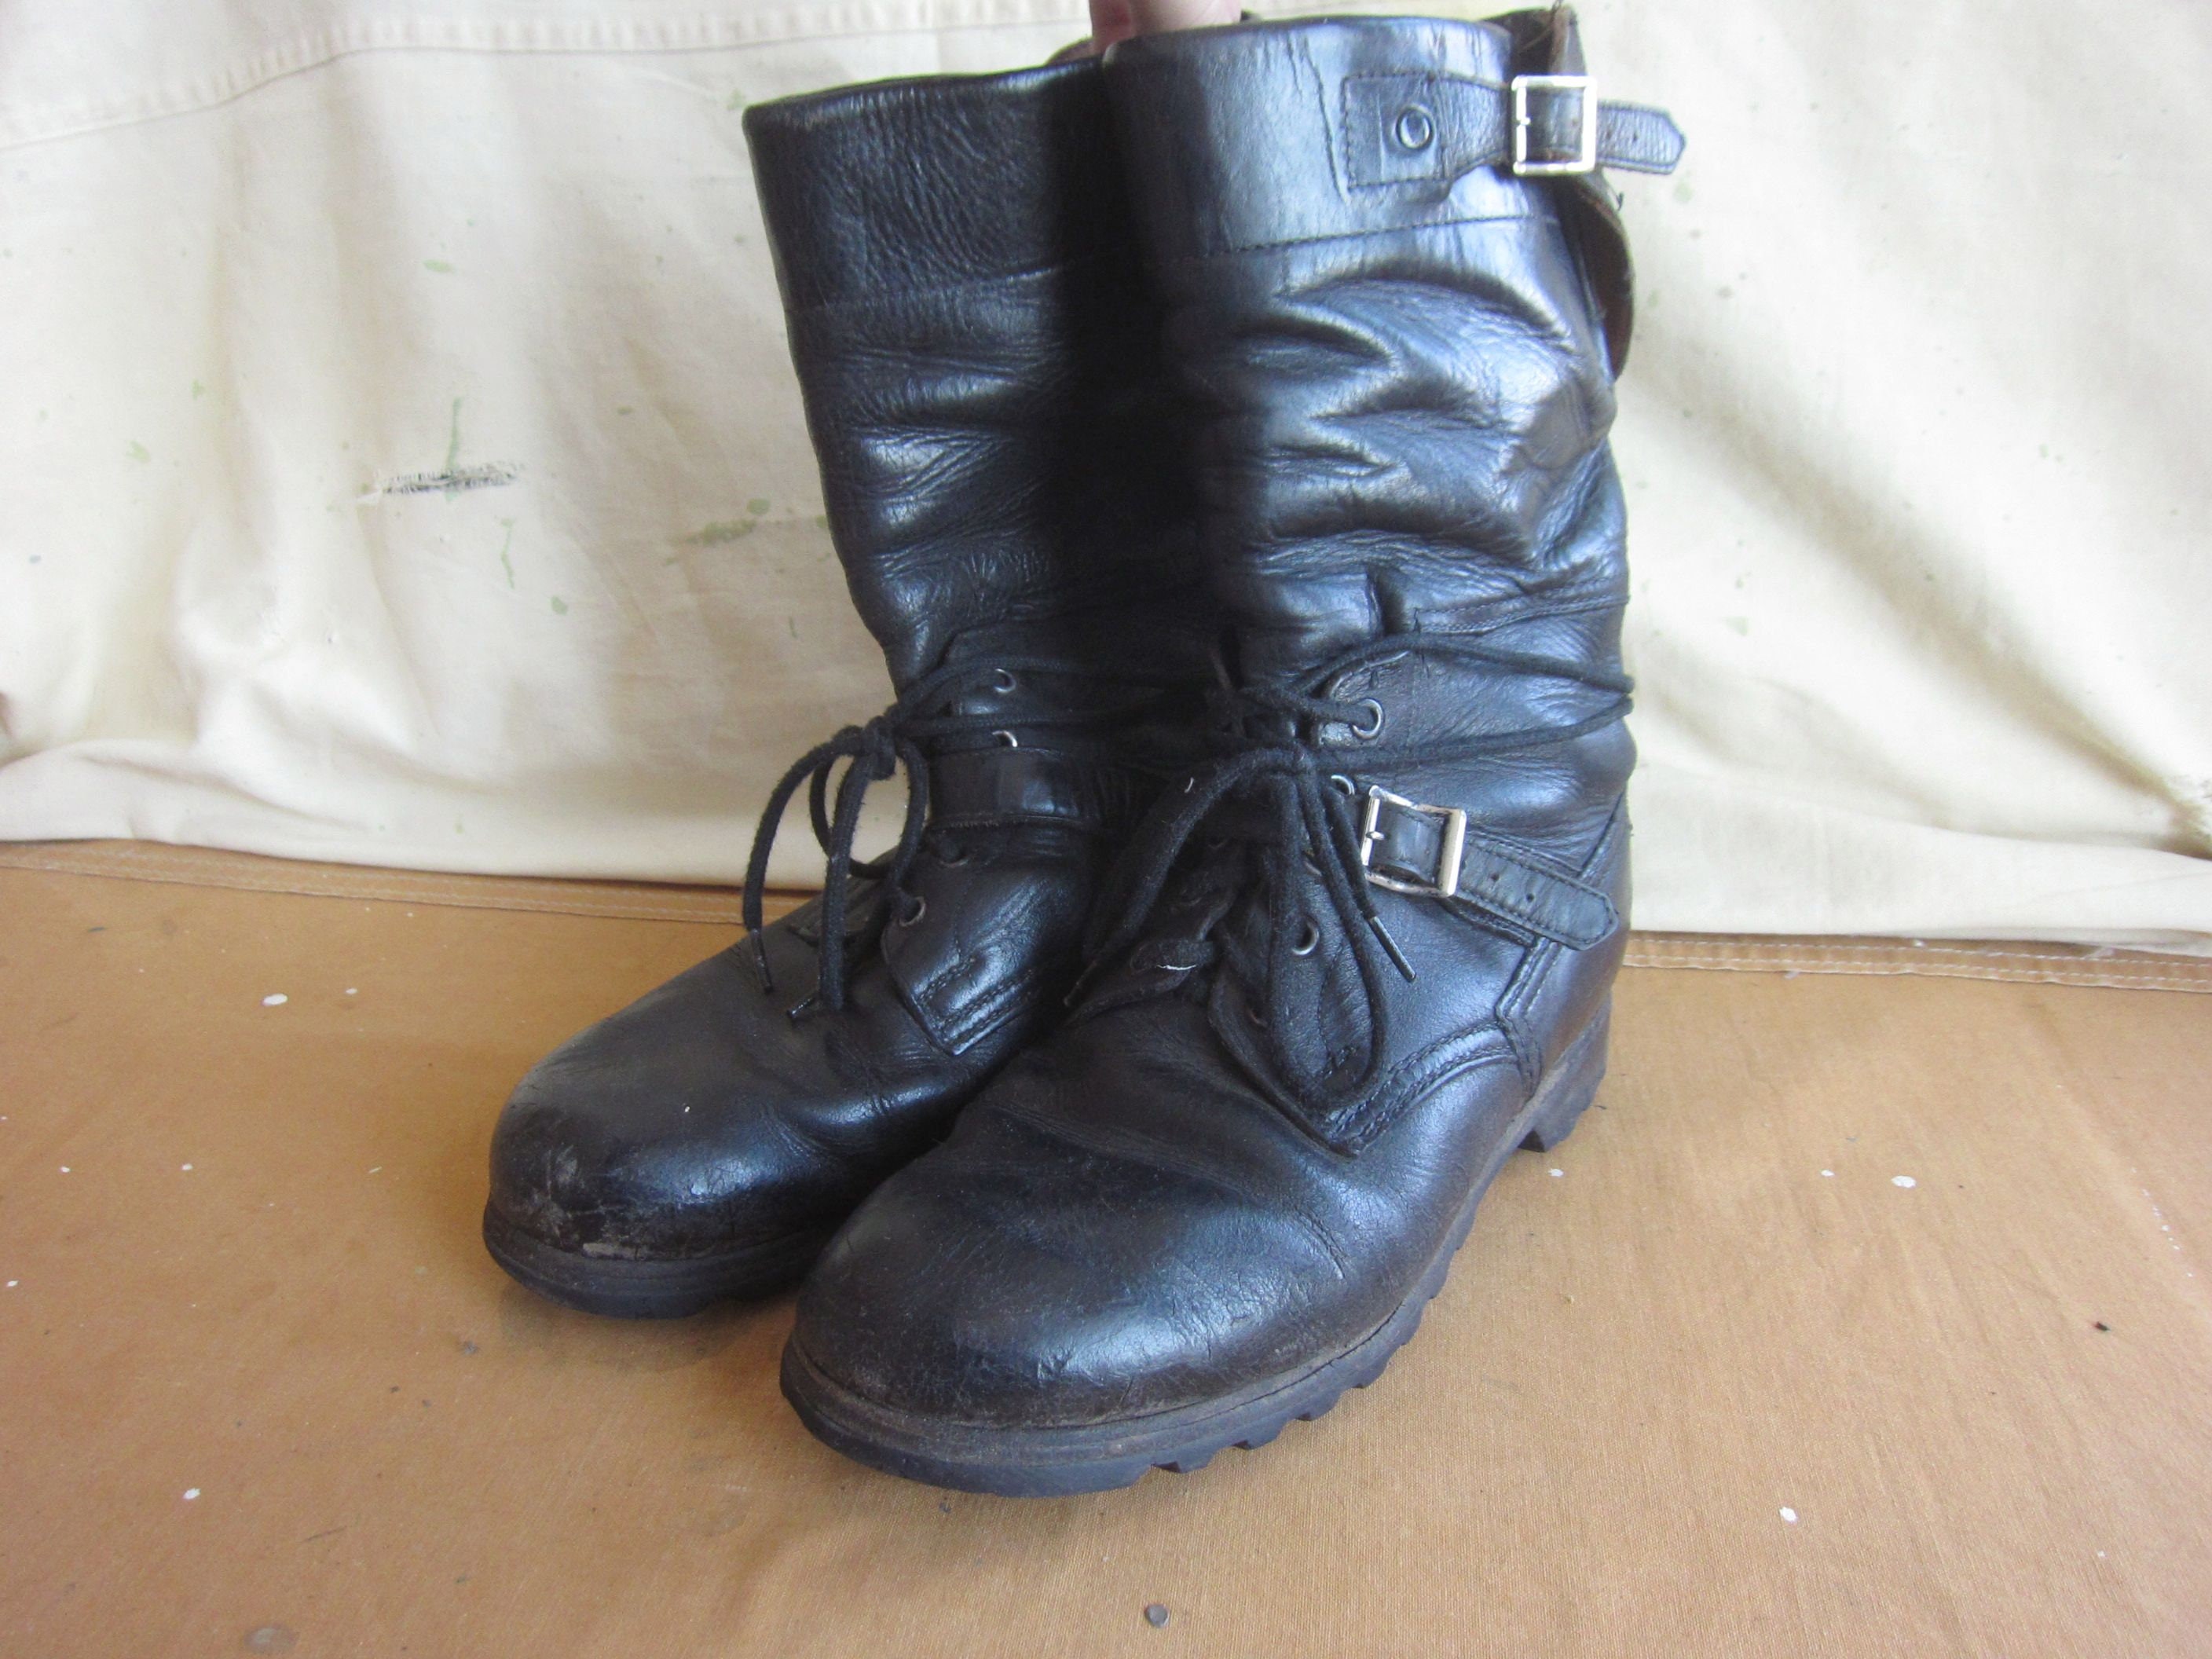 Spit out Democracy disgusting Men's 9 70s Croatian Black Leather Military Tanker Boots / - Etsy